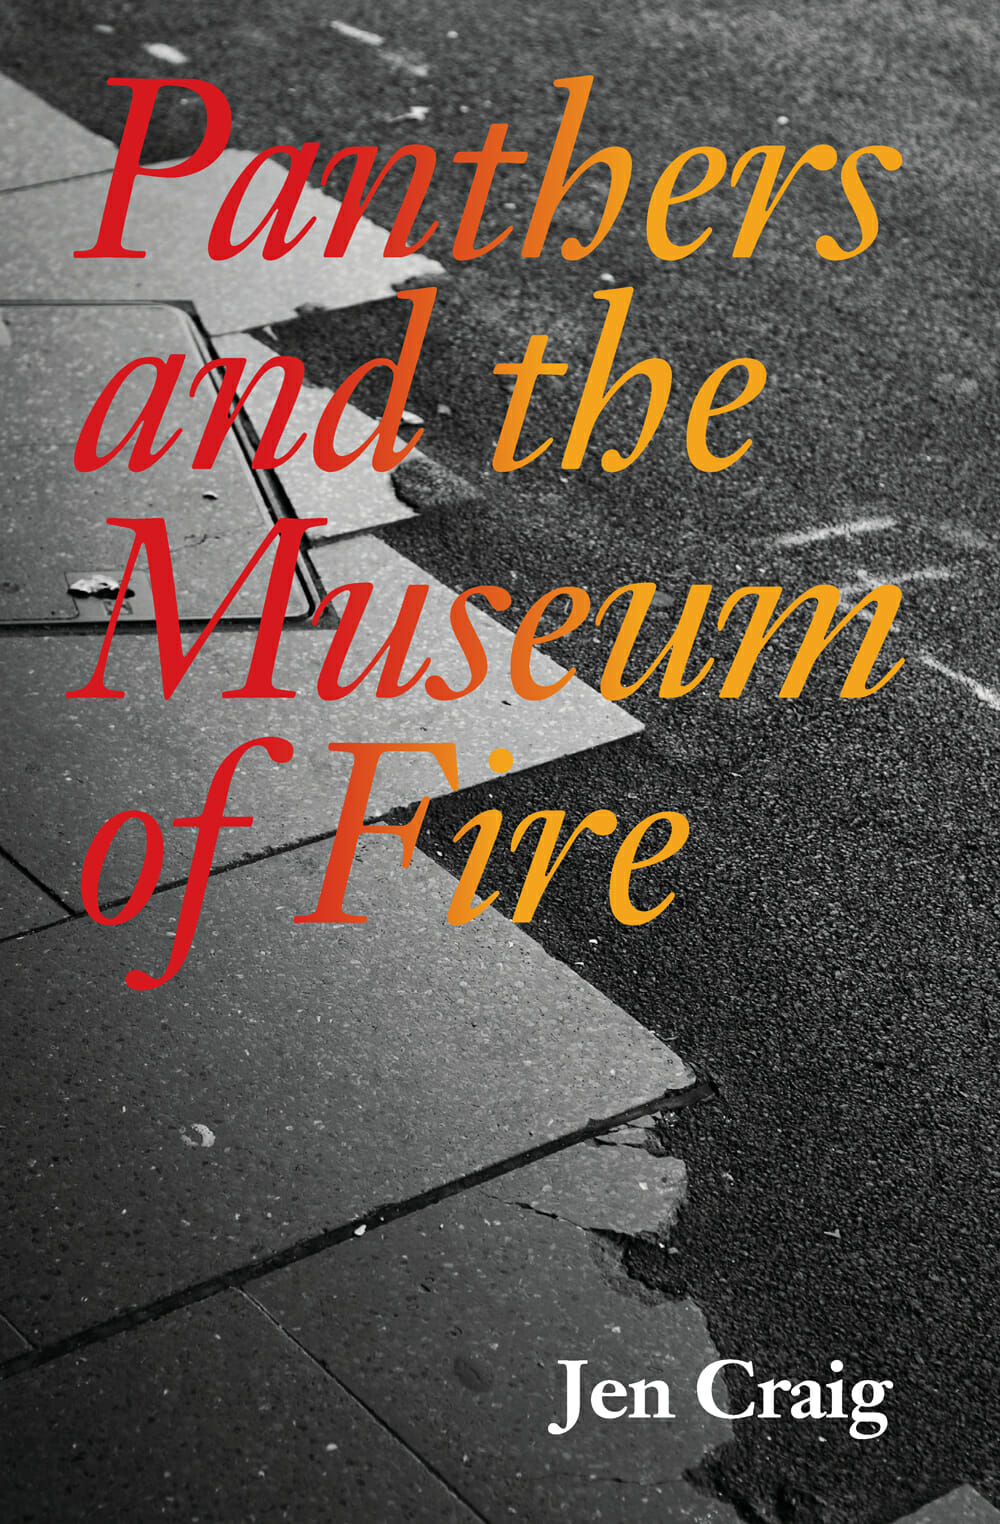 Panthers and the museum of fire – US edition